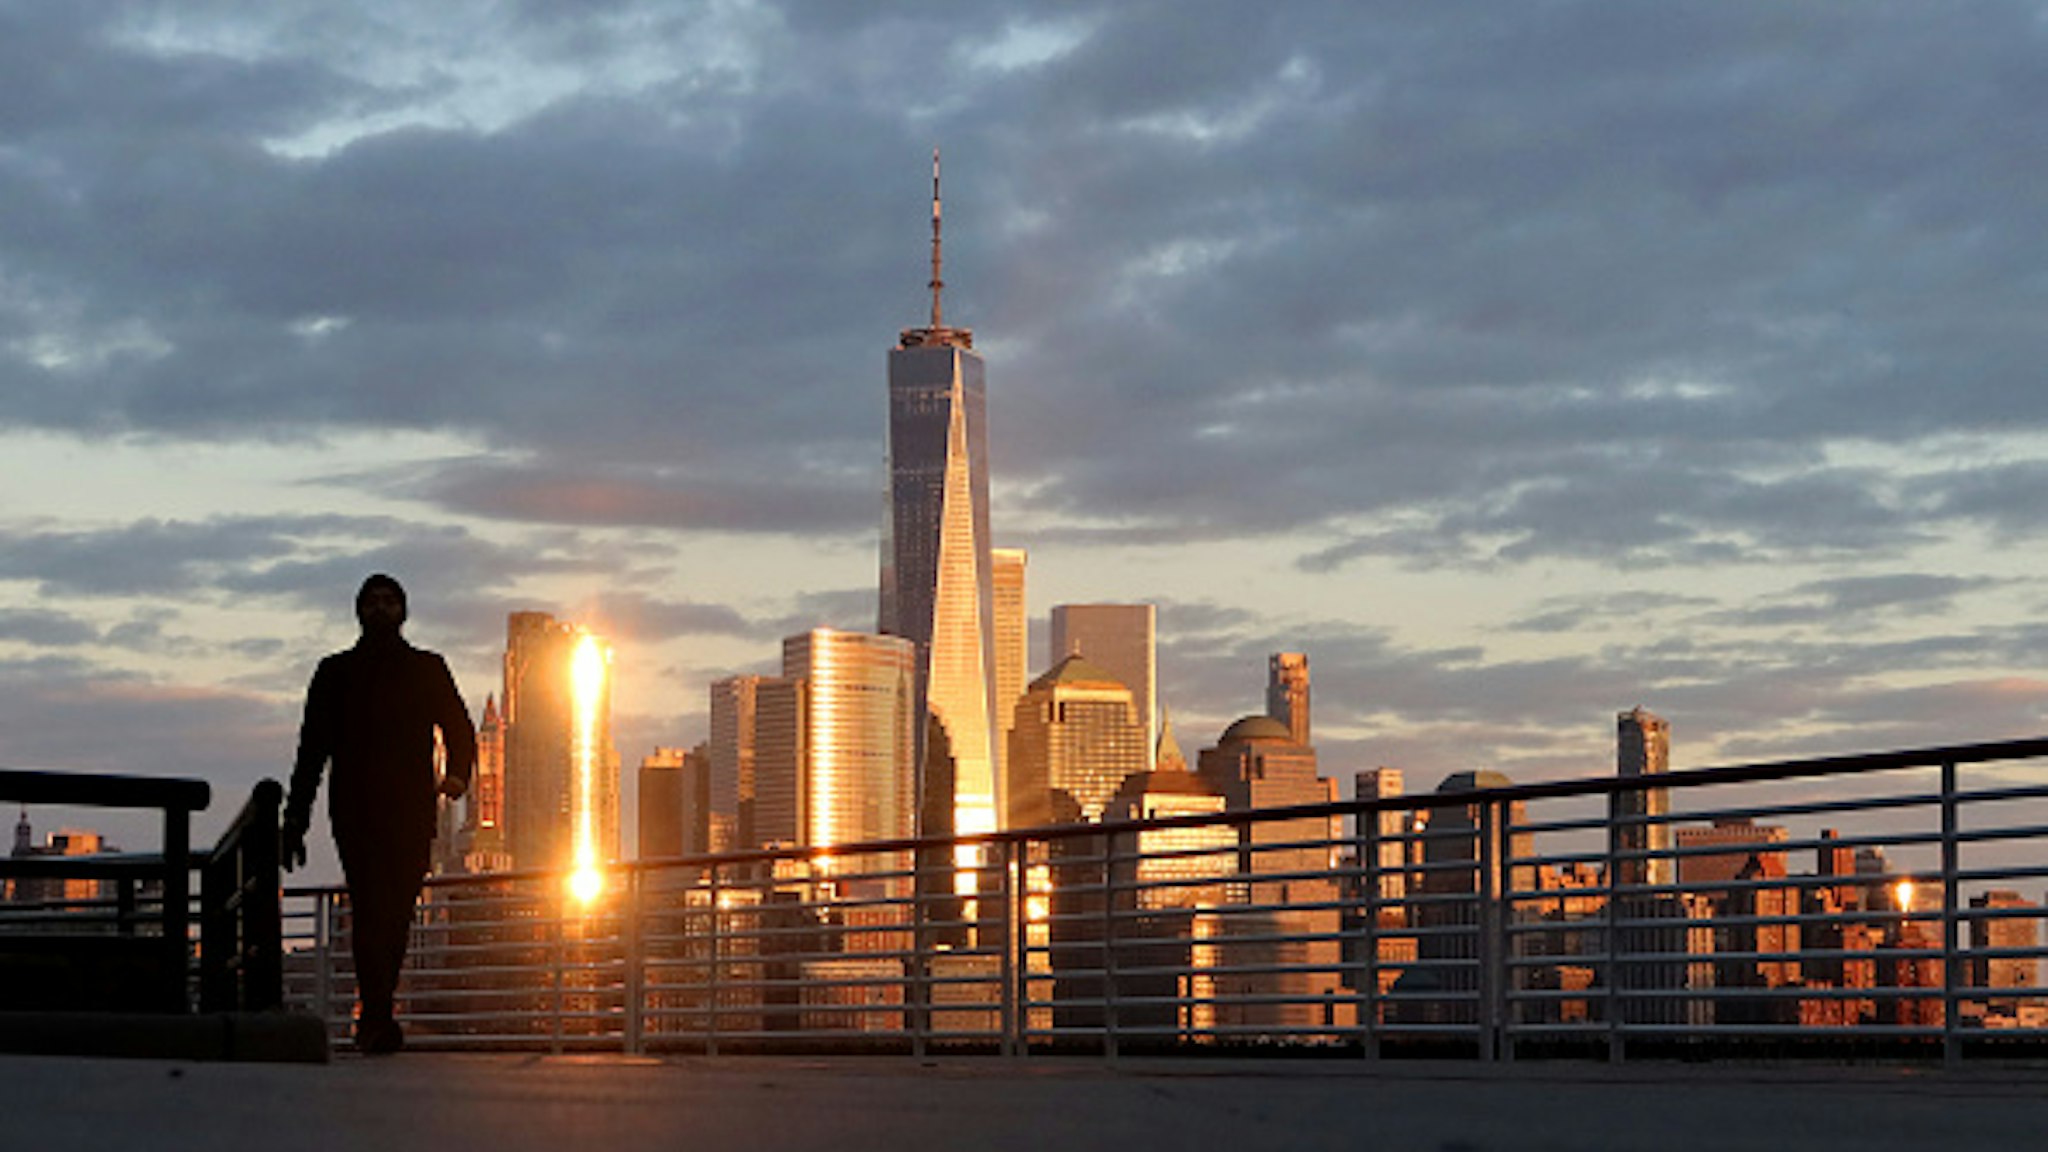 JERSEY CITY, NJ - APRIL 4: The sun sets on the skyline of lower Manhattan and One World Trade Center in New York City on April 4, 2020 as seen from Jersey City, New Jersey.